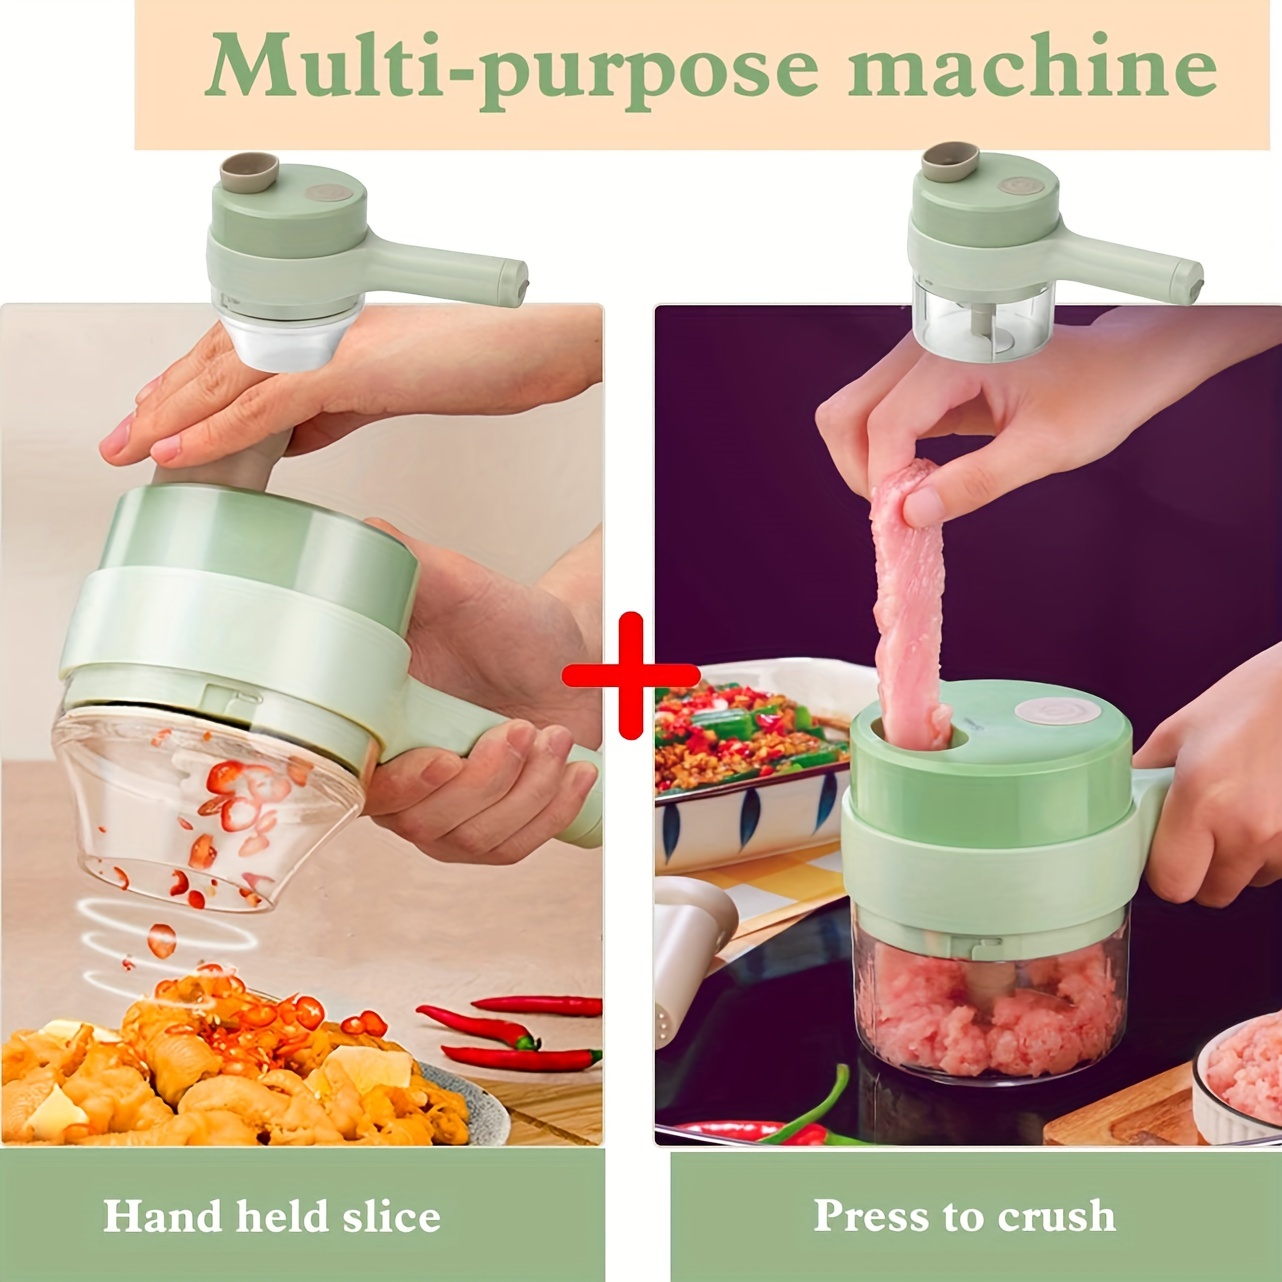  Kitchen Goods Electric Vegetable Cutter Set - 4 in 1 Portable,  Rechargeable, Wireless Food Processor & Chopper Machine for Pepper, Garlic,  Onion, Celery & Meat: Home & Kitchen